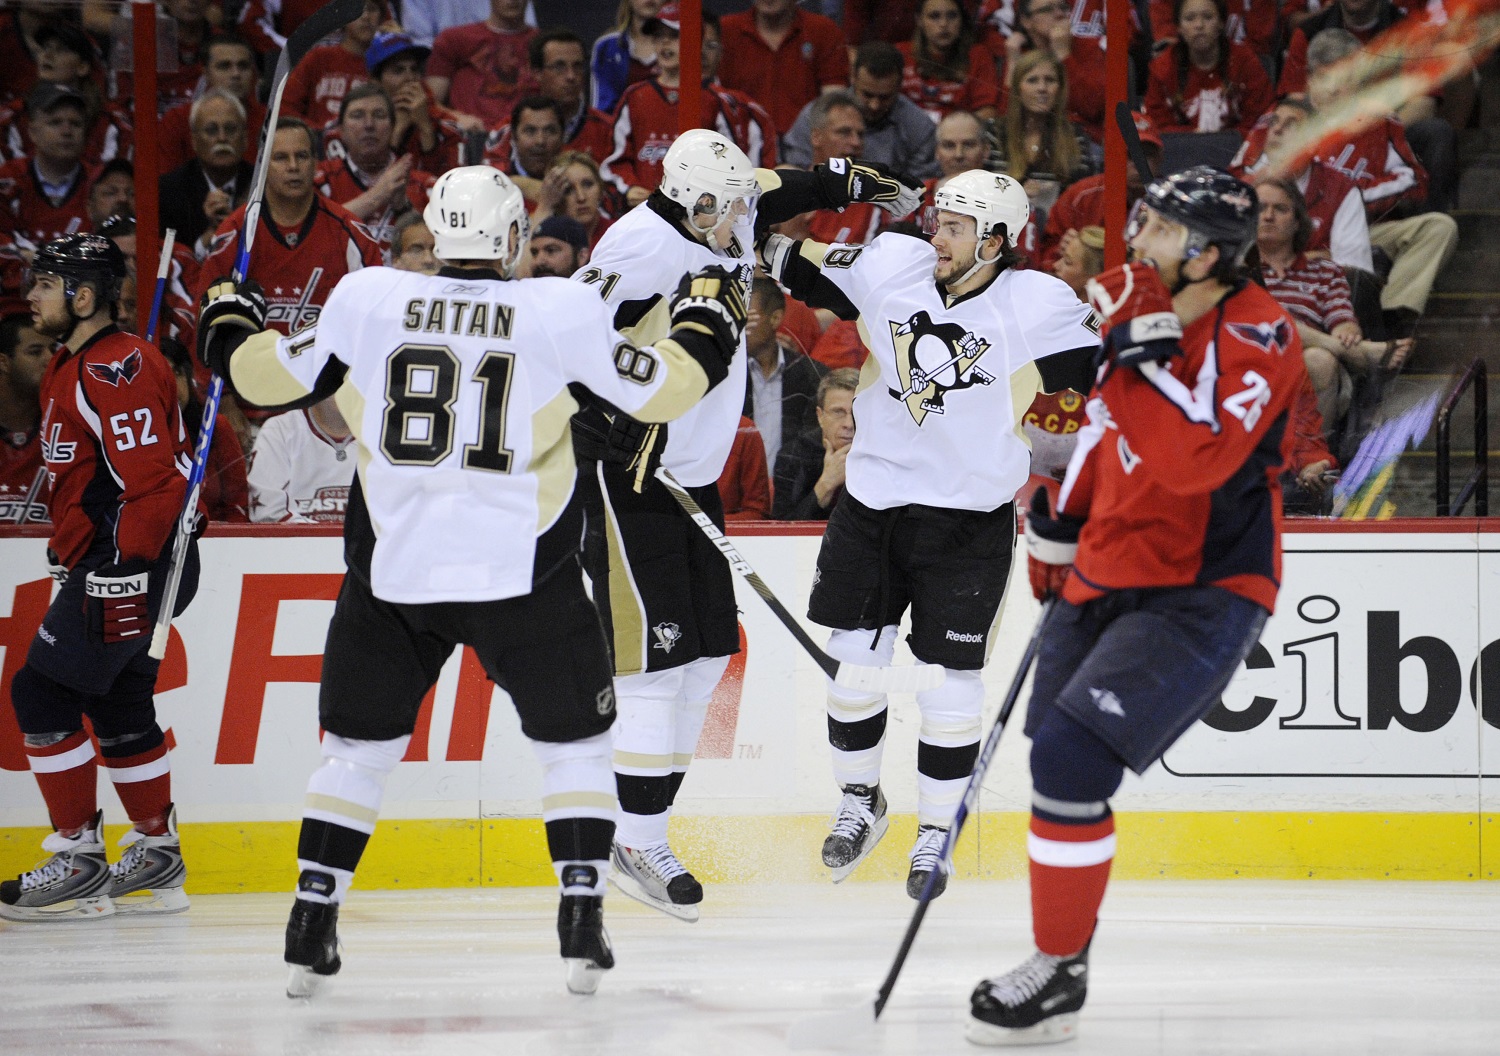 Pittsburgh Penguins' Kris Letang, second from right, celebrates his goal with Evgeni Malkin (71), from Russia, and Miroslav Satan (81), from Slovakia, as Washington Capitals defensemen Mike Green, left, and Shaone Morrisonn (26) skate past during the second period of Game 7 of an NHL hockey second-round playoff series, Wednesday, May 13, 2009, in Washington. The Penguins won 6-2.(AP Photo/Nick Wass)